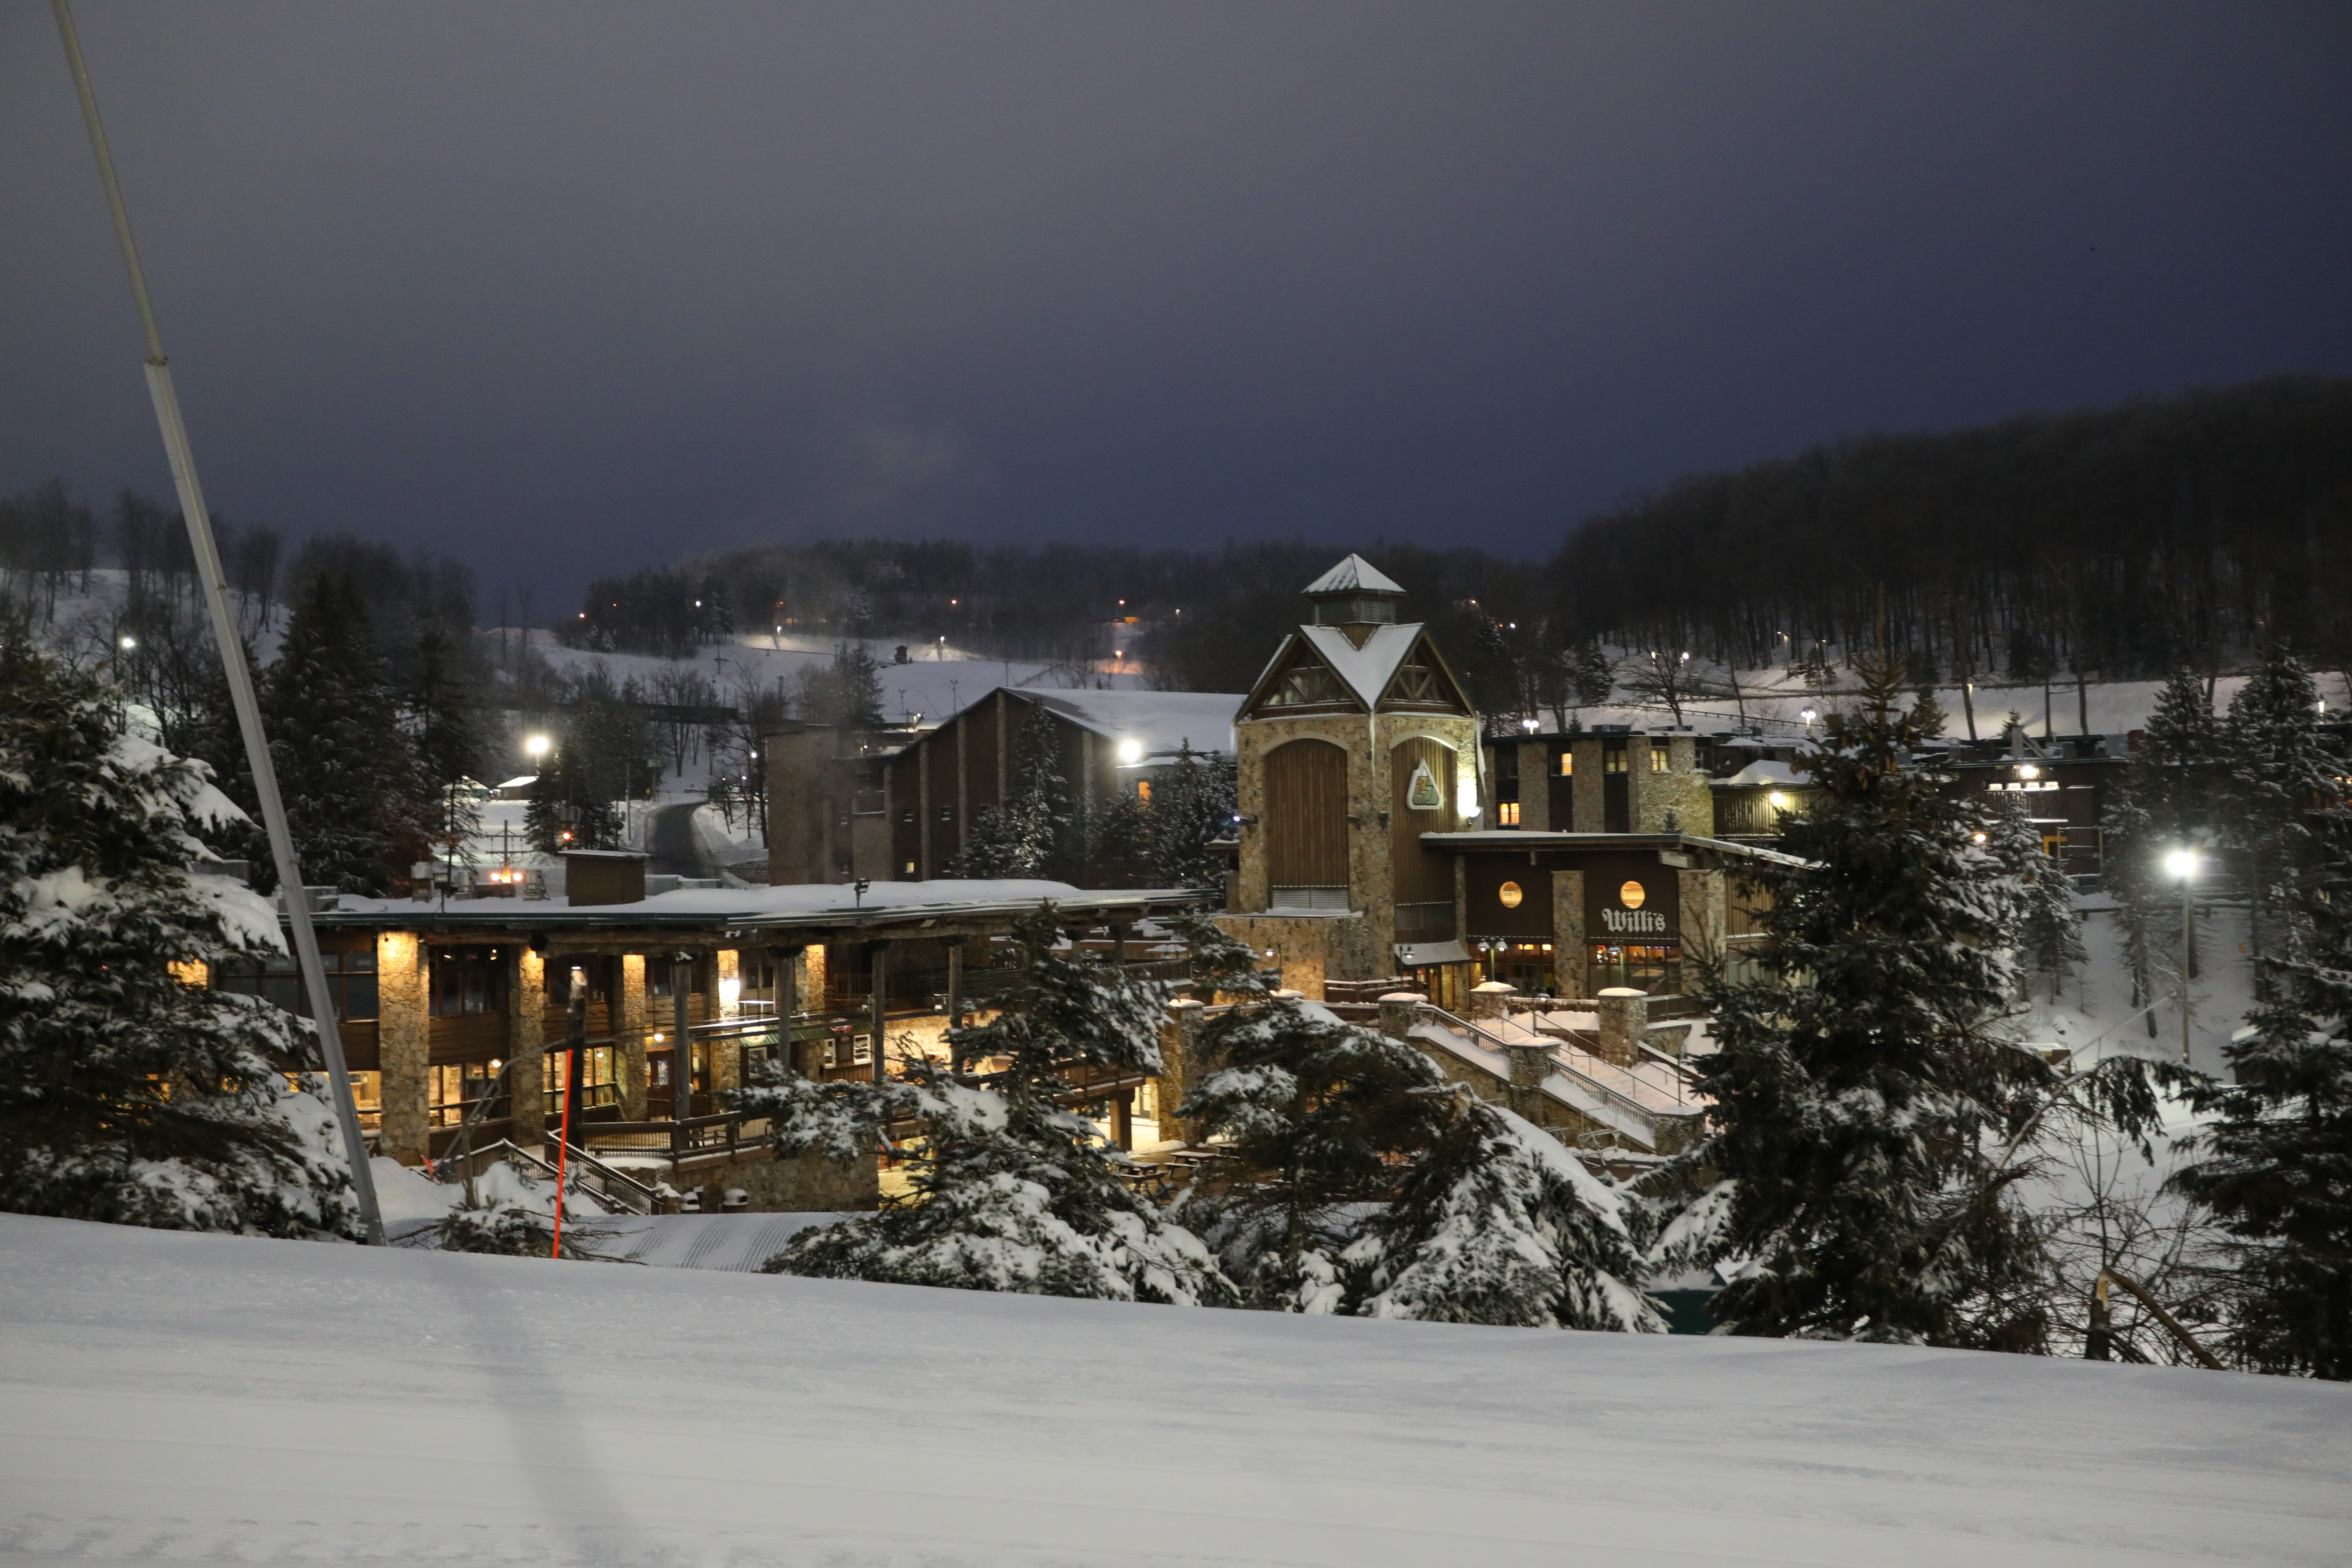 How Seven Springs Resort Fits the Moniker, "A Cruise Ship in the Mountains"